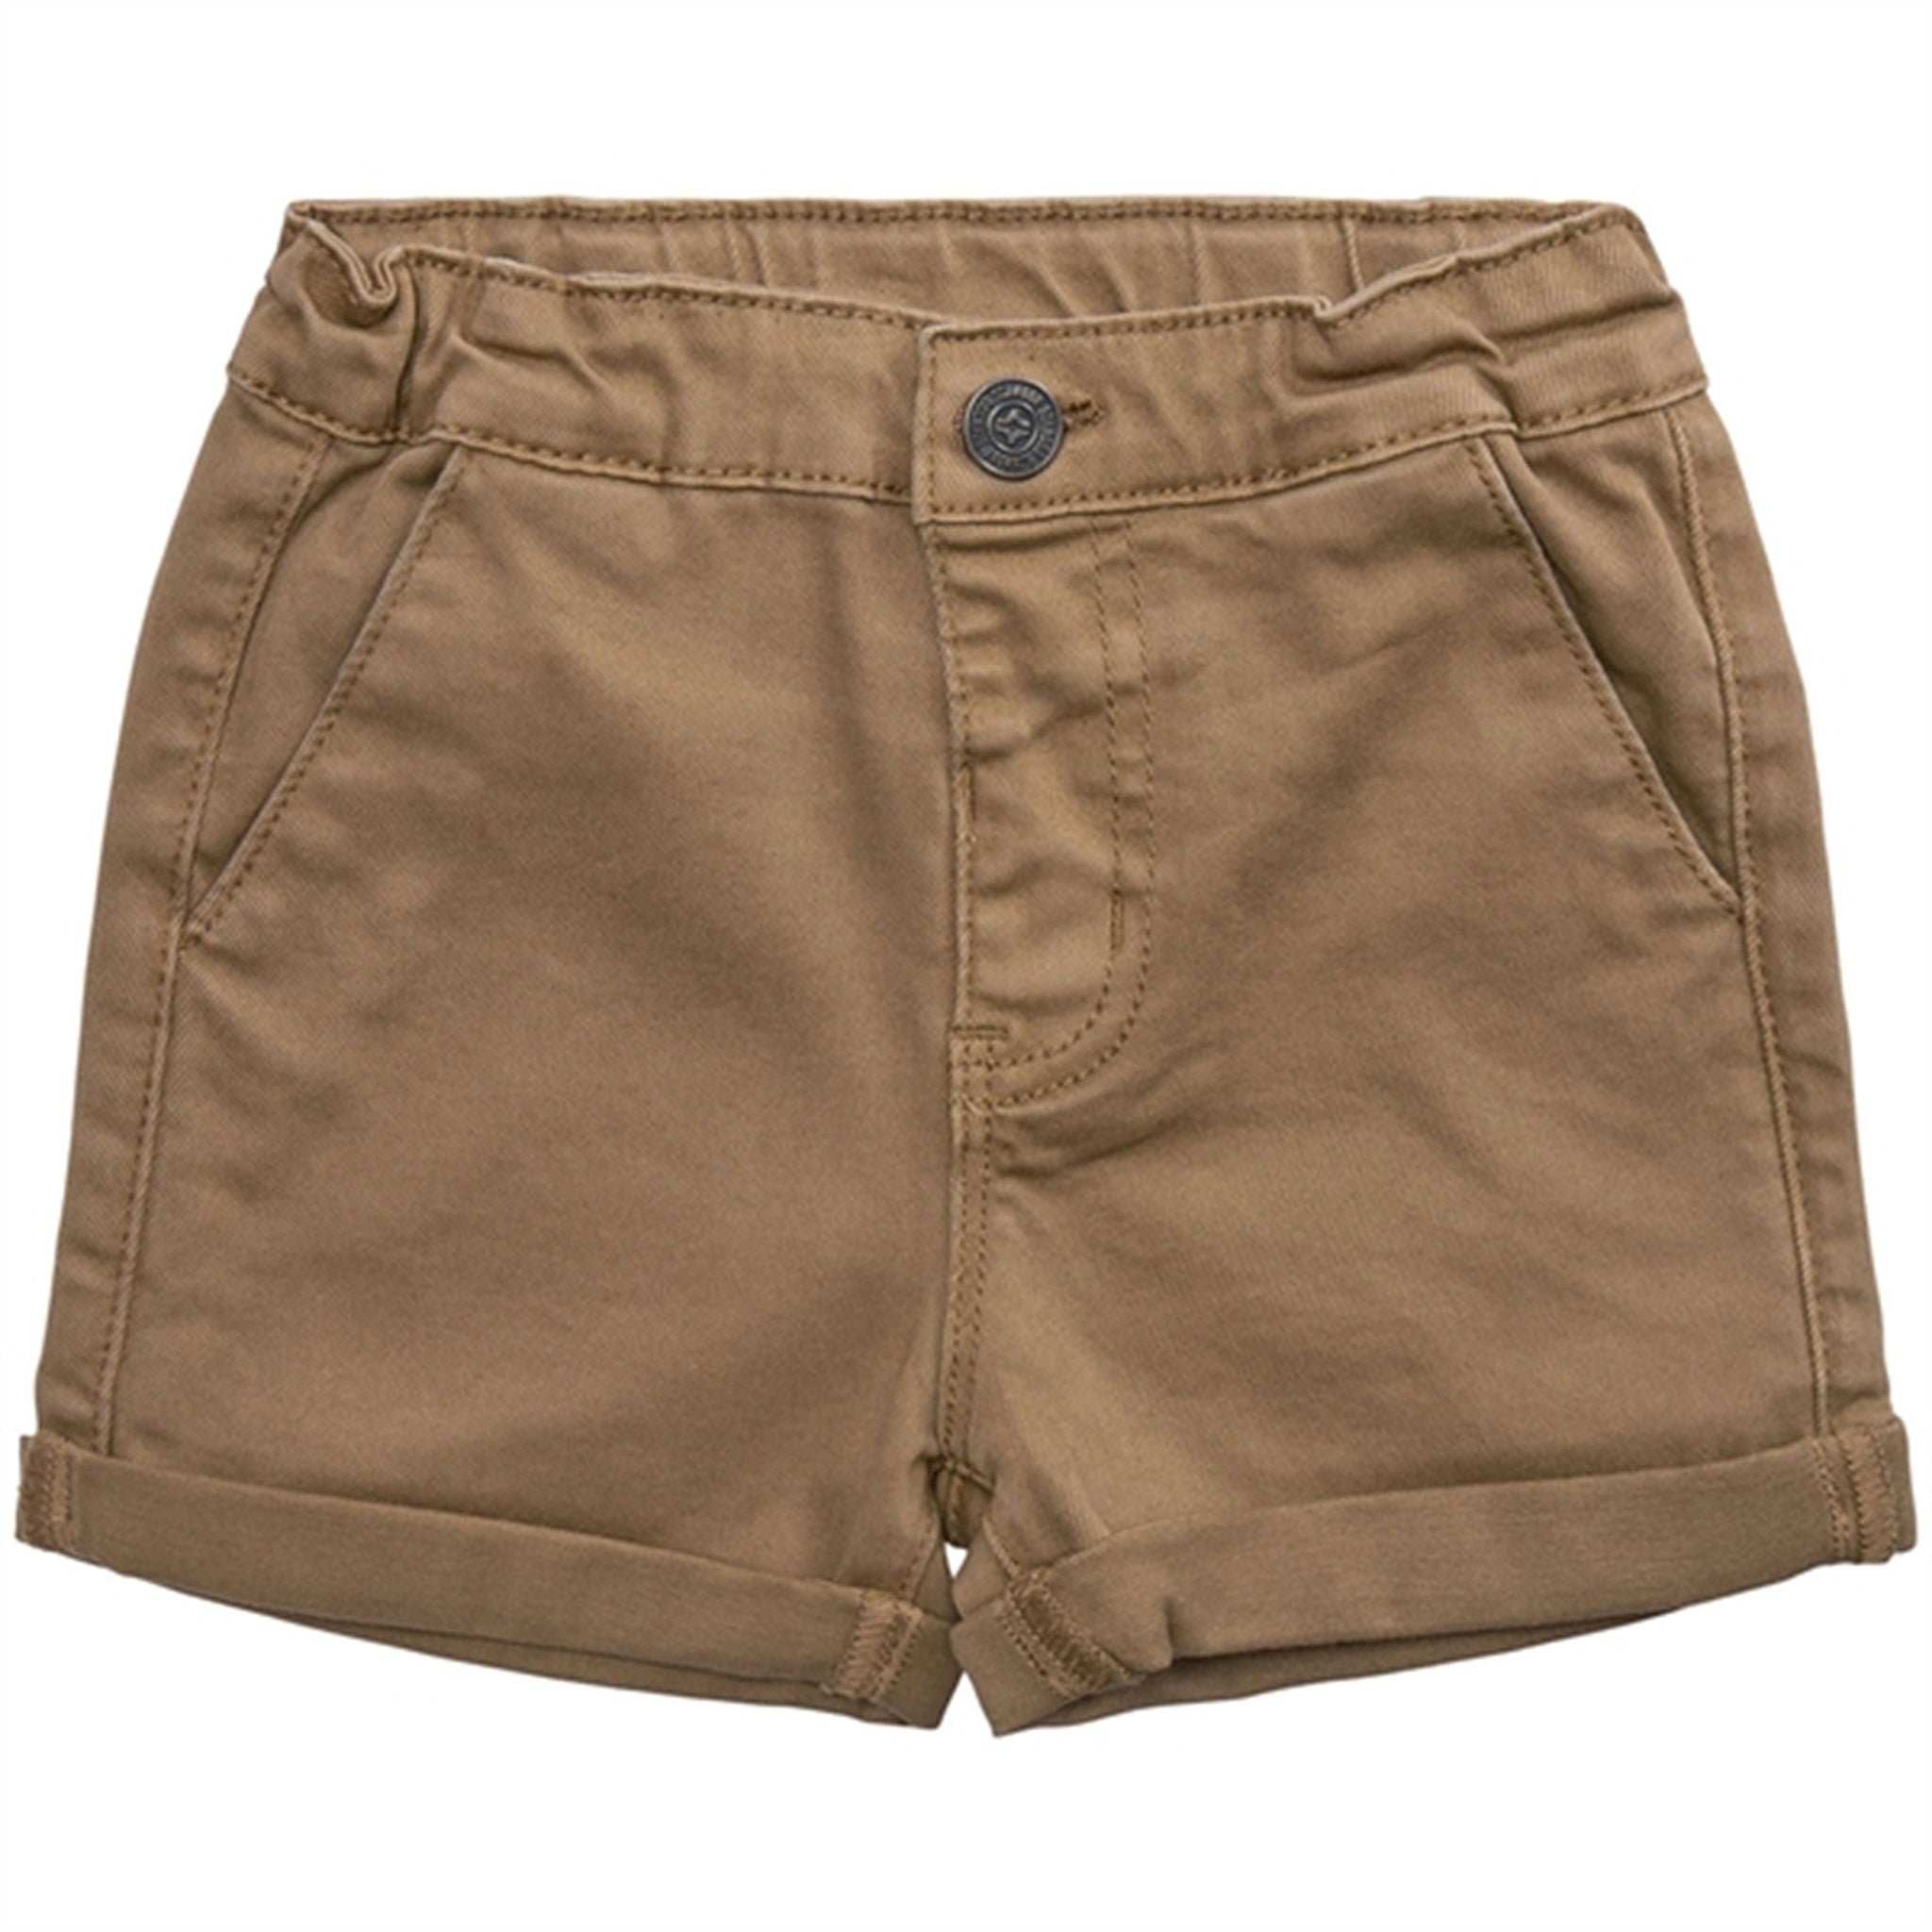 Petit by Sofie Schnoor Camel Shorts 7